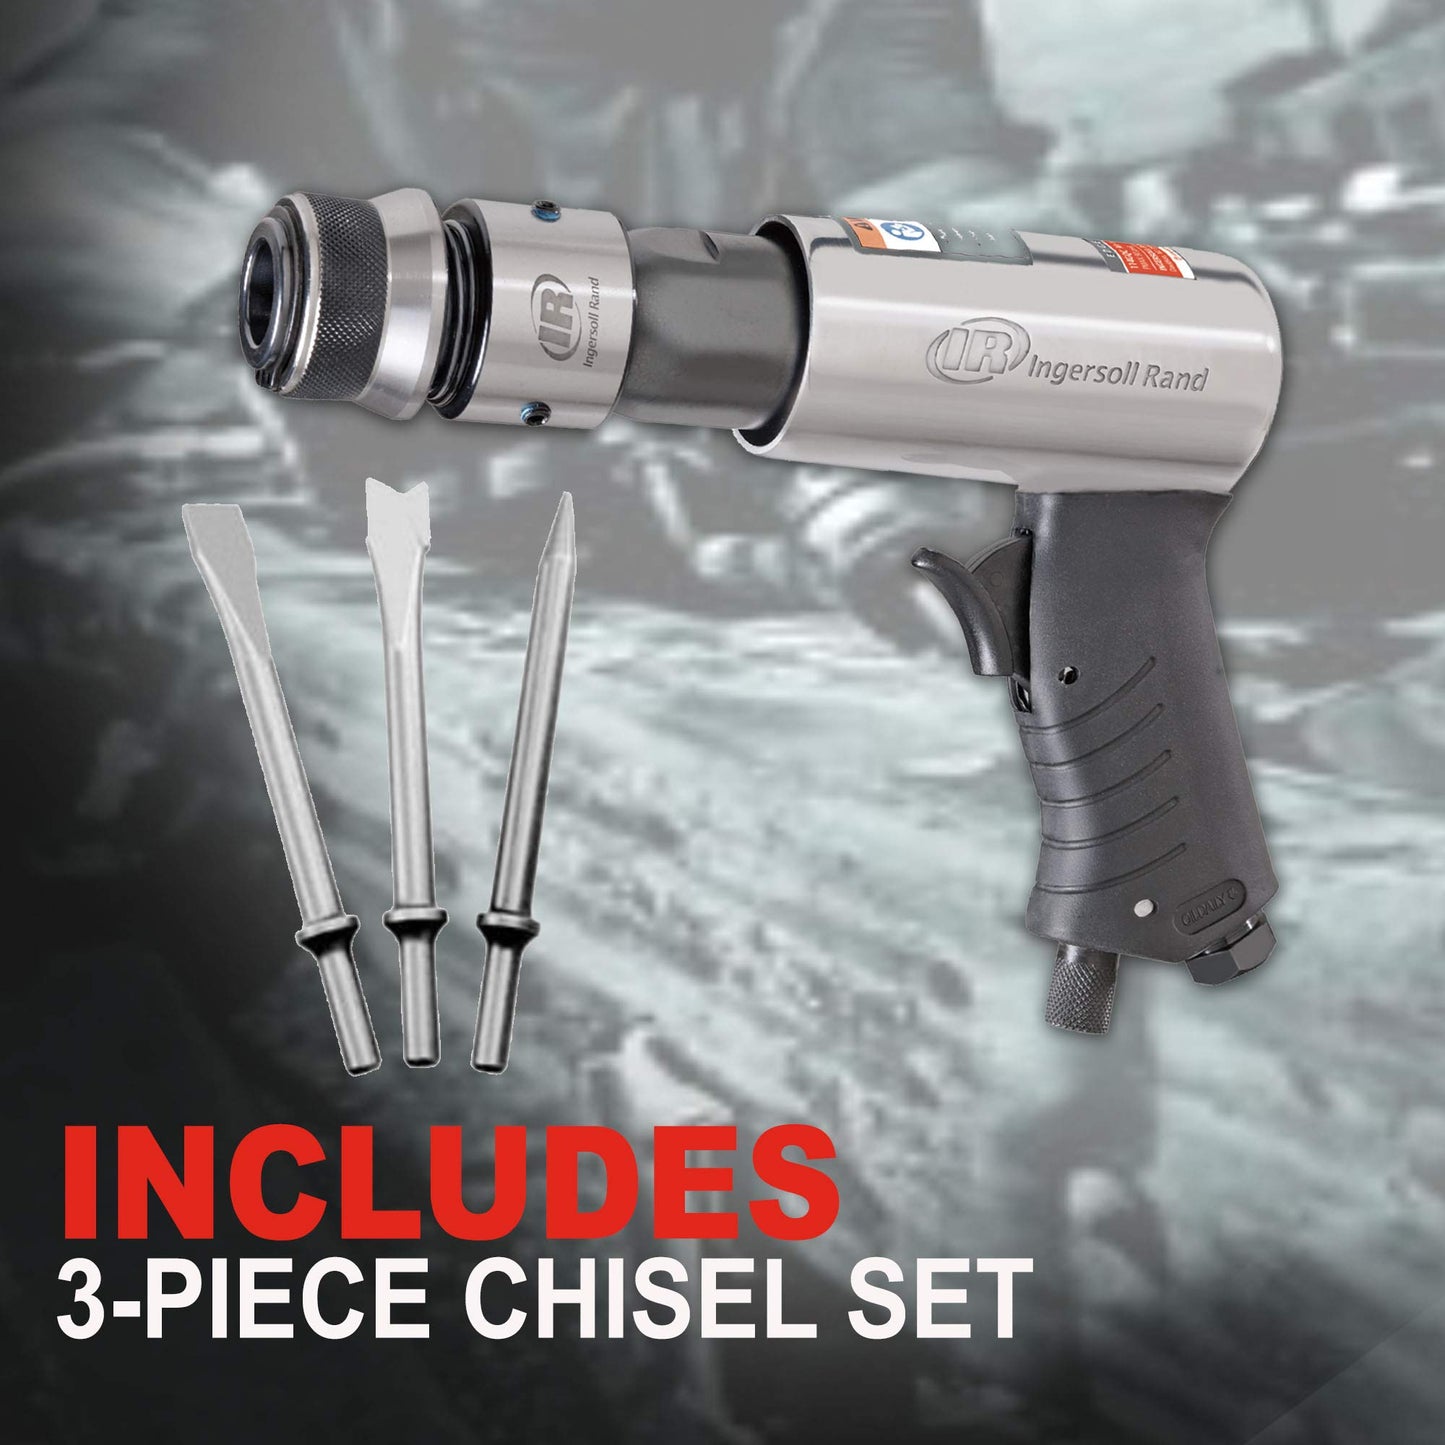 Ingersoll Rand 114GQC Air Hammer - 3 PC Chisel Set with Tapered Punch, Panel Cutter, Flat Chisel, 2-5/8 Inch stroke, 3500 BPM, Lightweight, Compact,